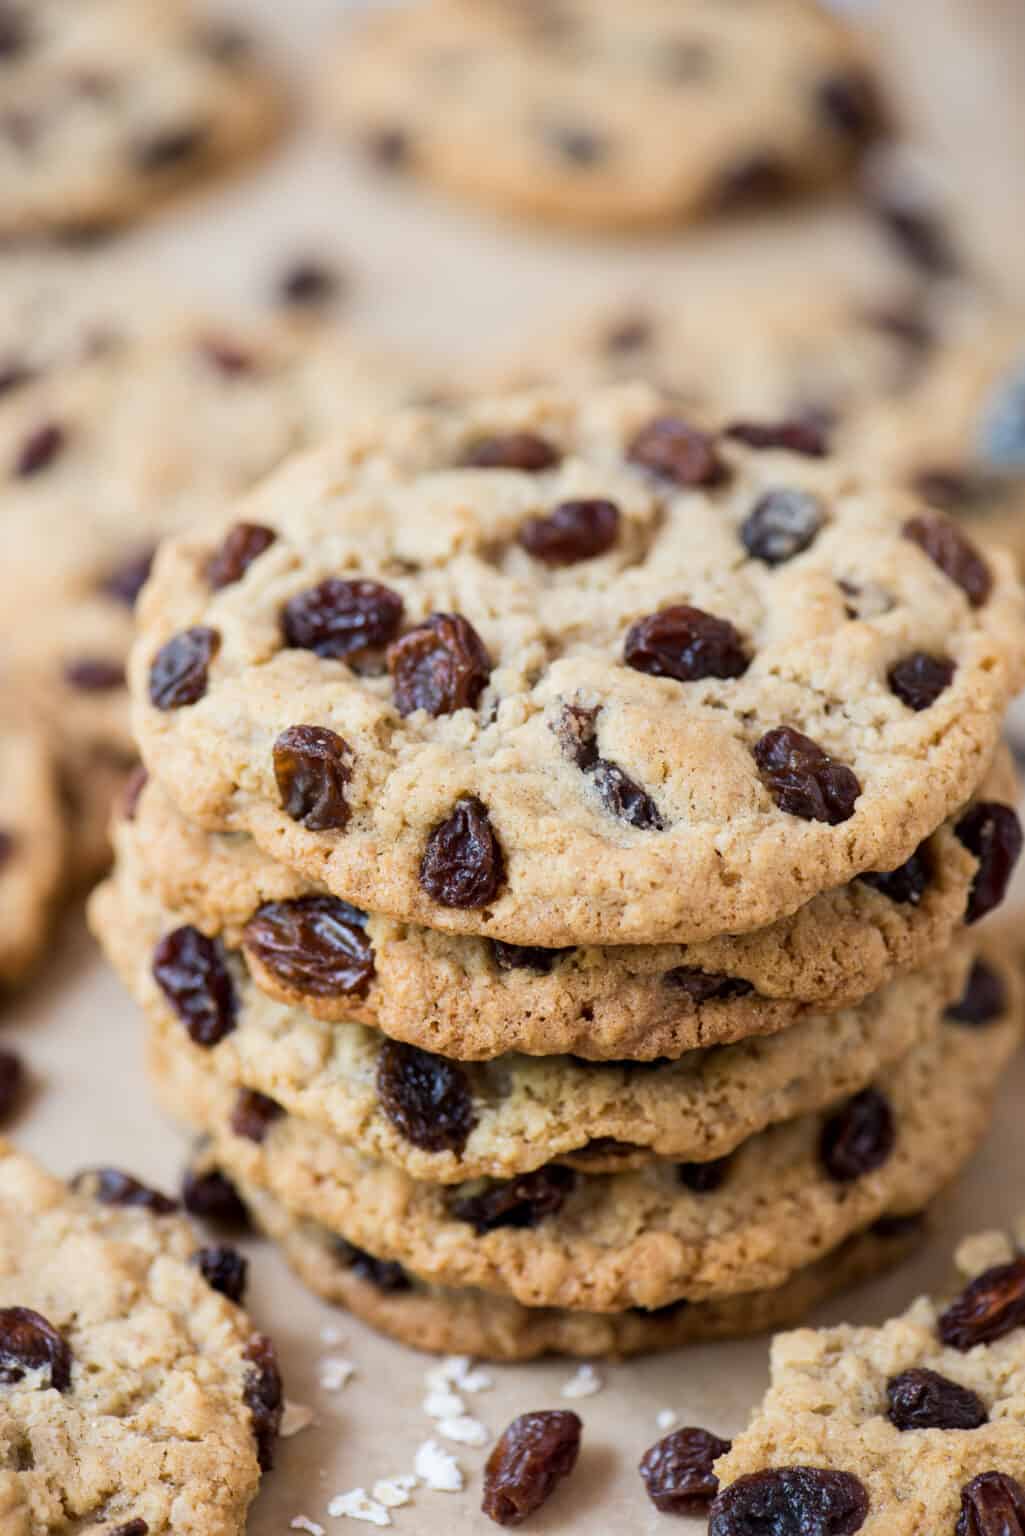 Oatmeal Raisin Cookies (30 minutes & no chilling required)